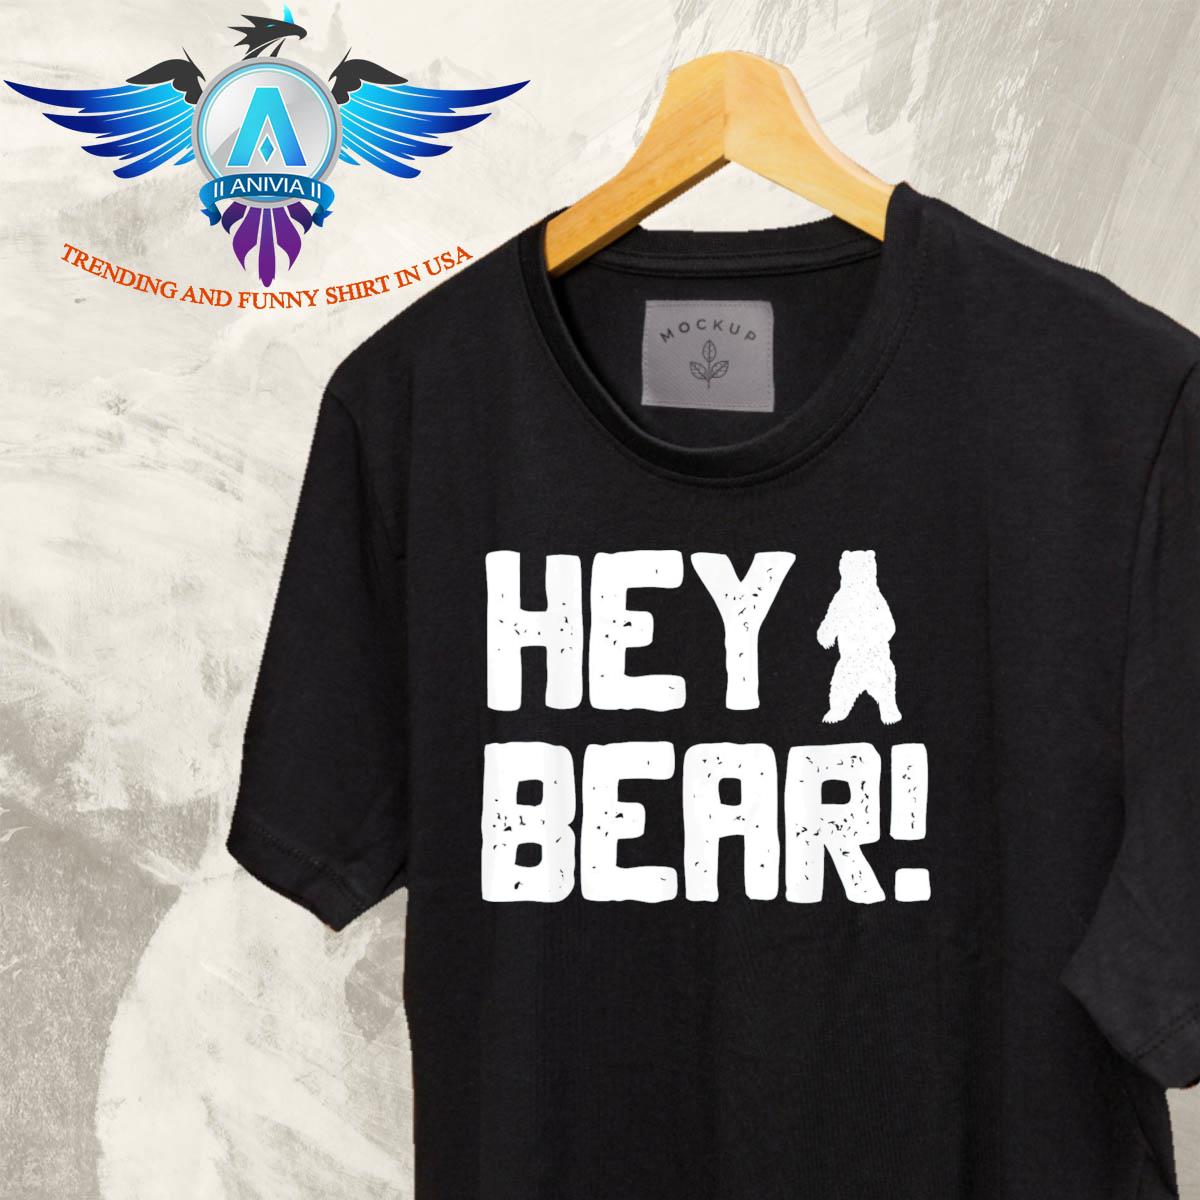 Hey bear! hiking outdoors black grizzly bear survival funny T-shirt